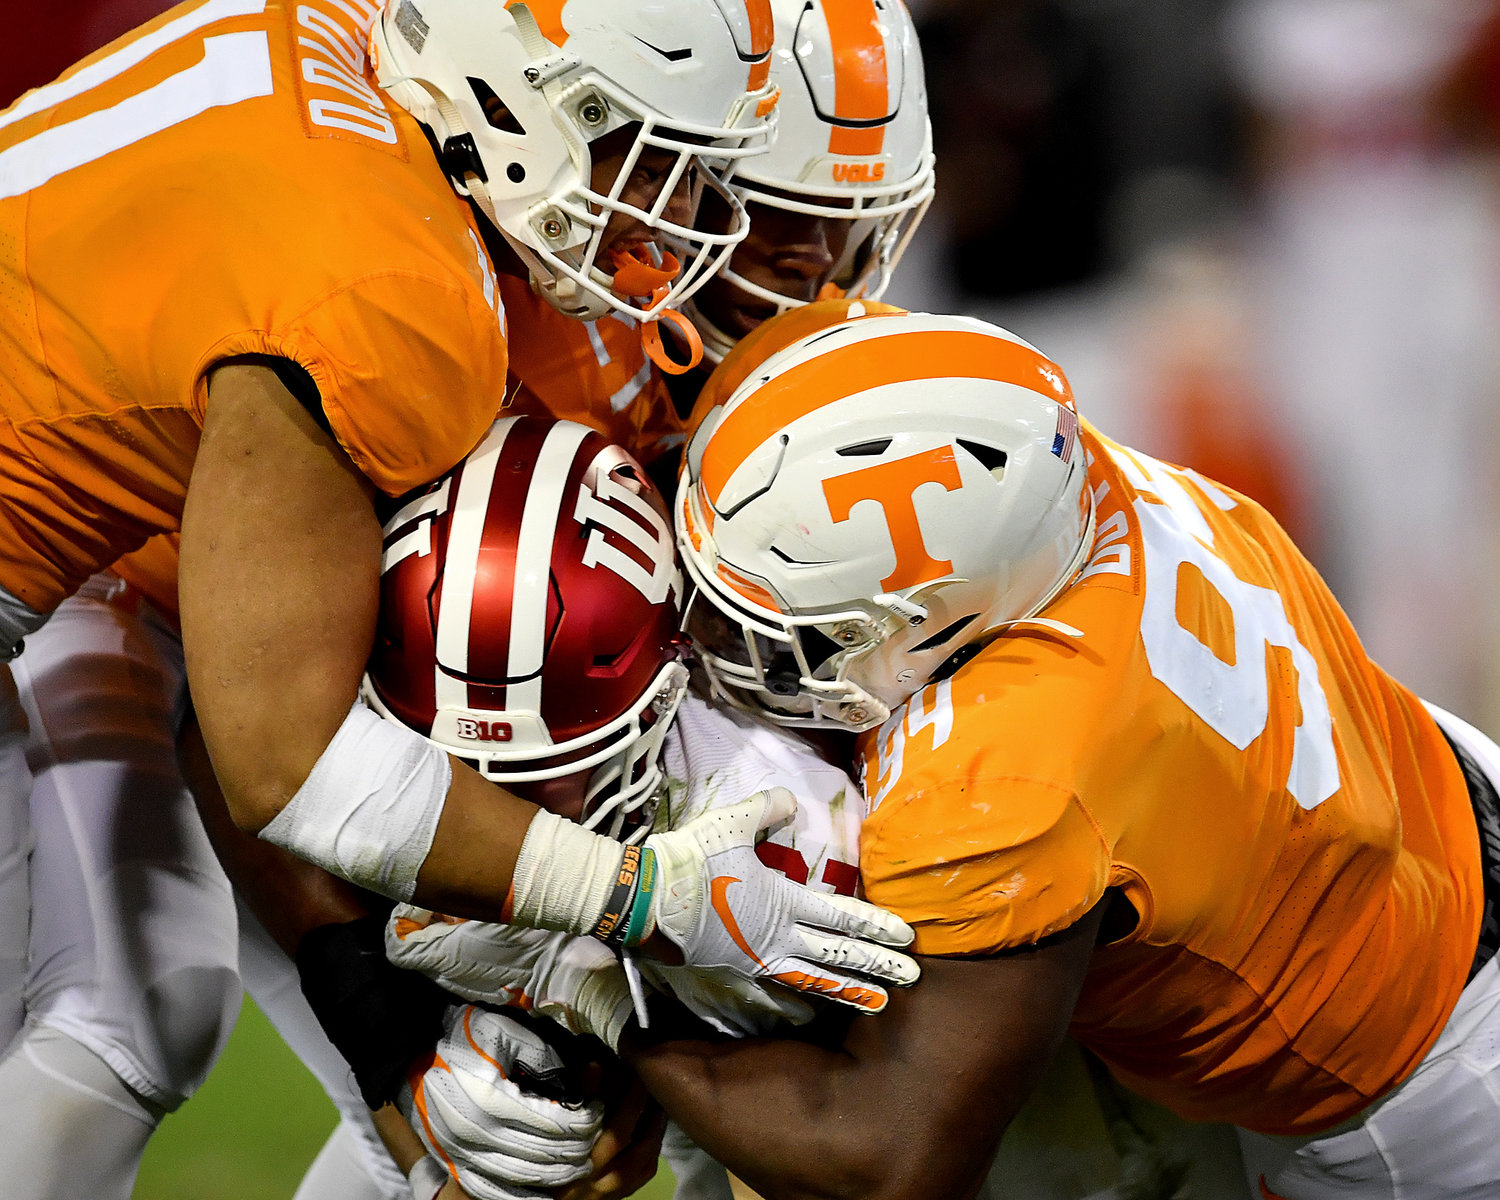 Indiana Hoosiers quarterback Peyton Ramsey (12) is sacked by Tennessee Volunteers defensive lineman Matthew Butler (94), linebacker Shanon Reid (21) and Tennessee linebacker Henry To'o To'o (11) in the first half of the Gator Bowl NCAA football game Thursday, January 2, 2020, at TIAA Bank Field in Jacksonville, Fla.